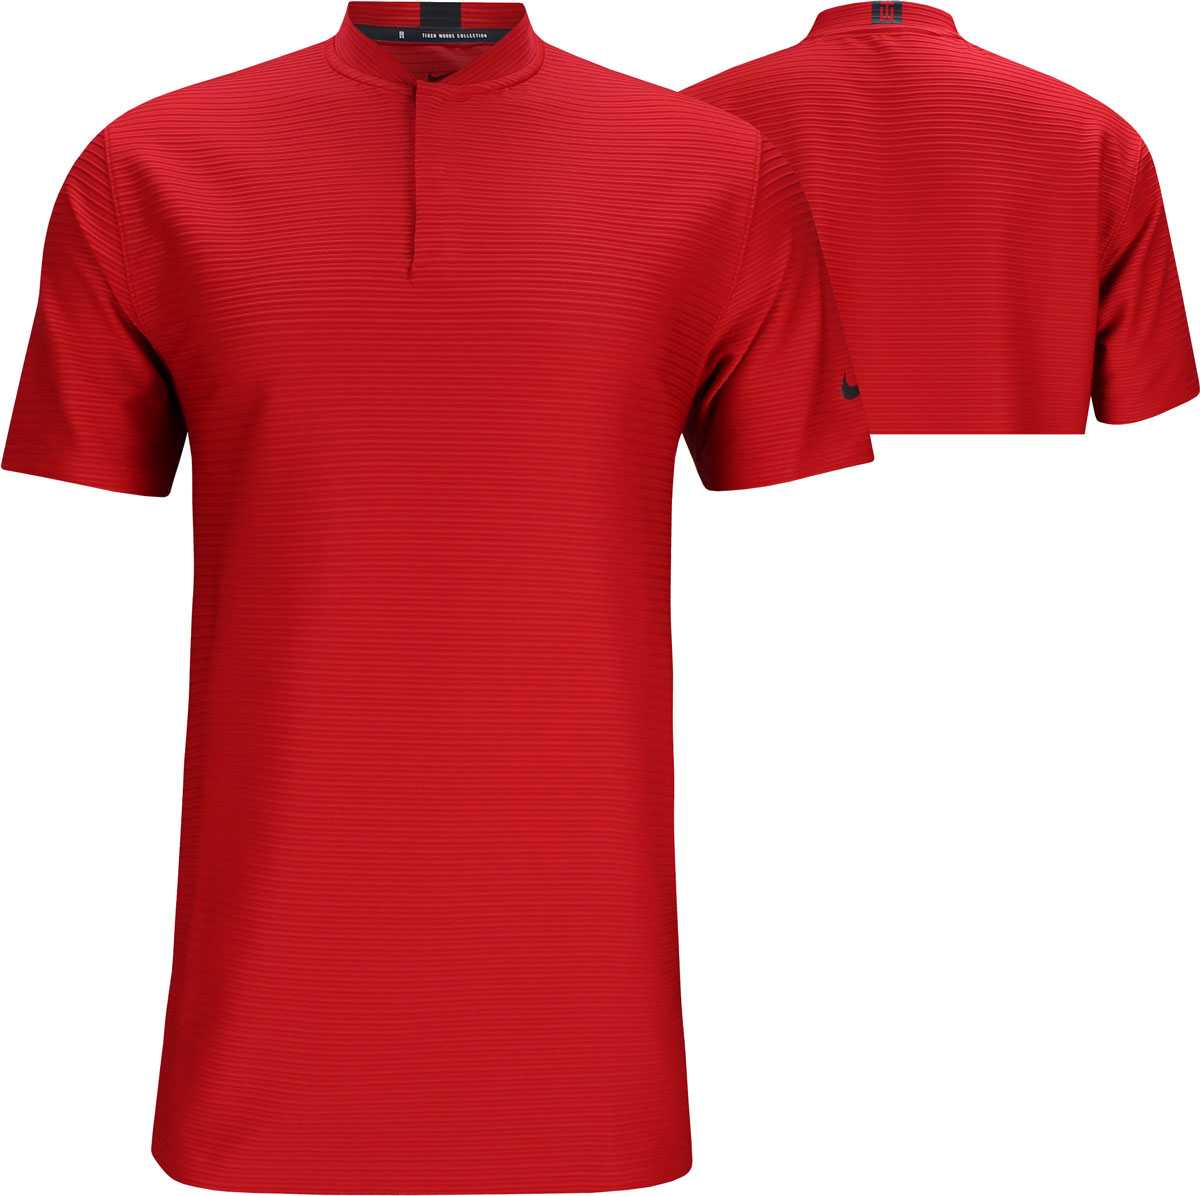 red tiger woods shirt